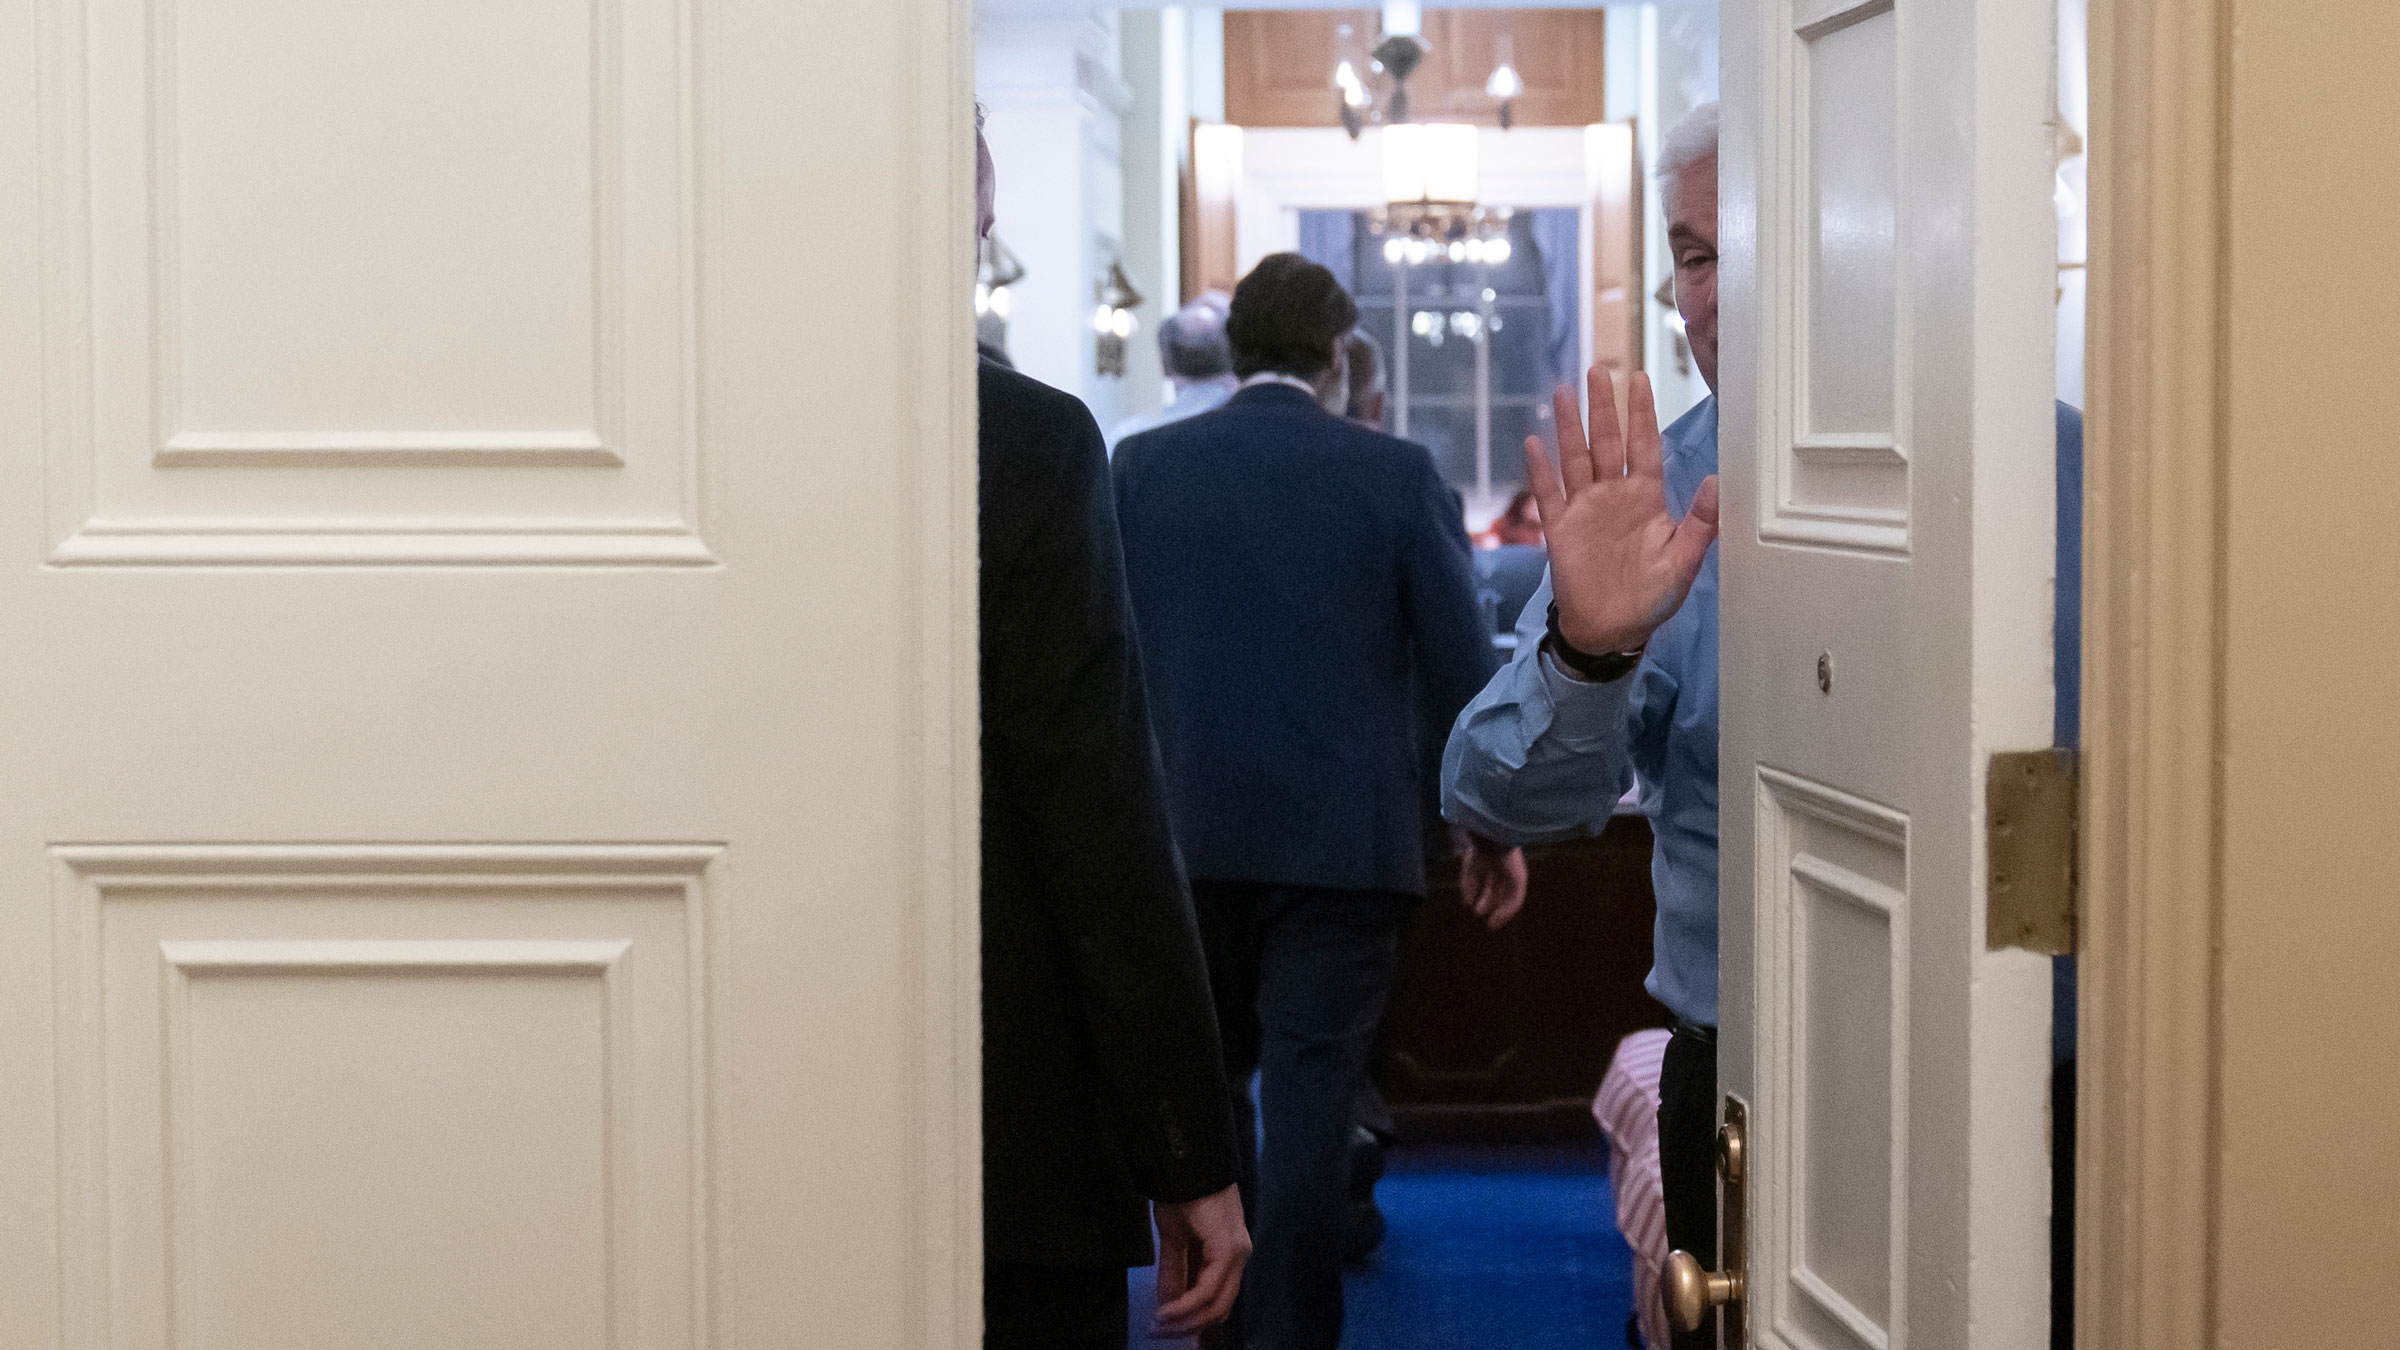 US Rep. Tom Emmer, a Republican from Minnesota, waves as members go behind closed doors to negotiate after Tuesday's failed votes.